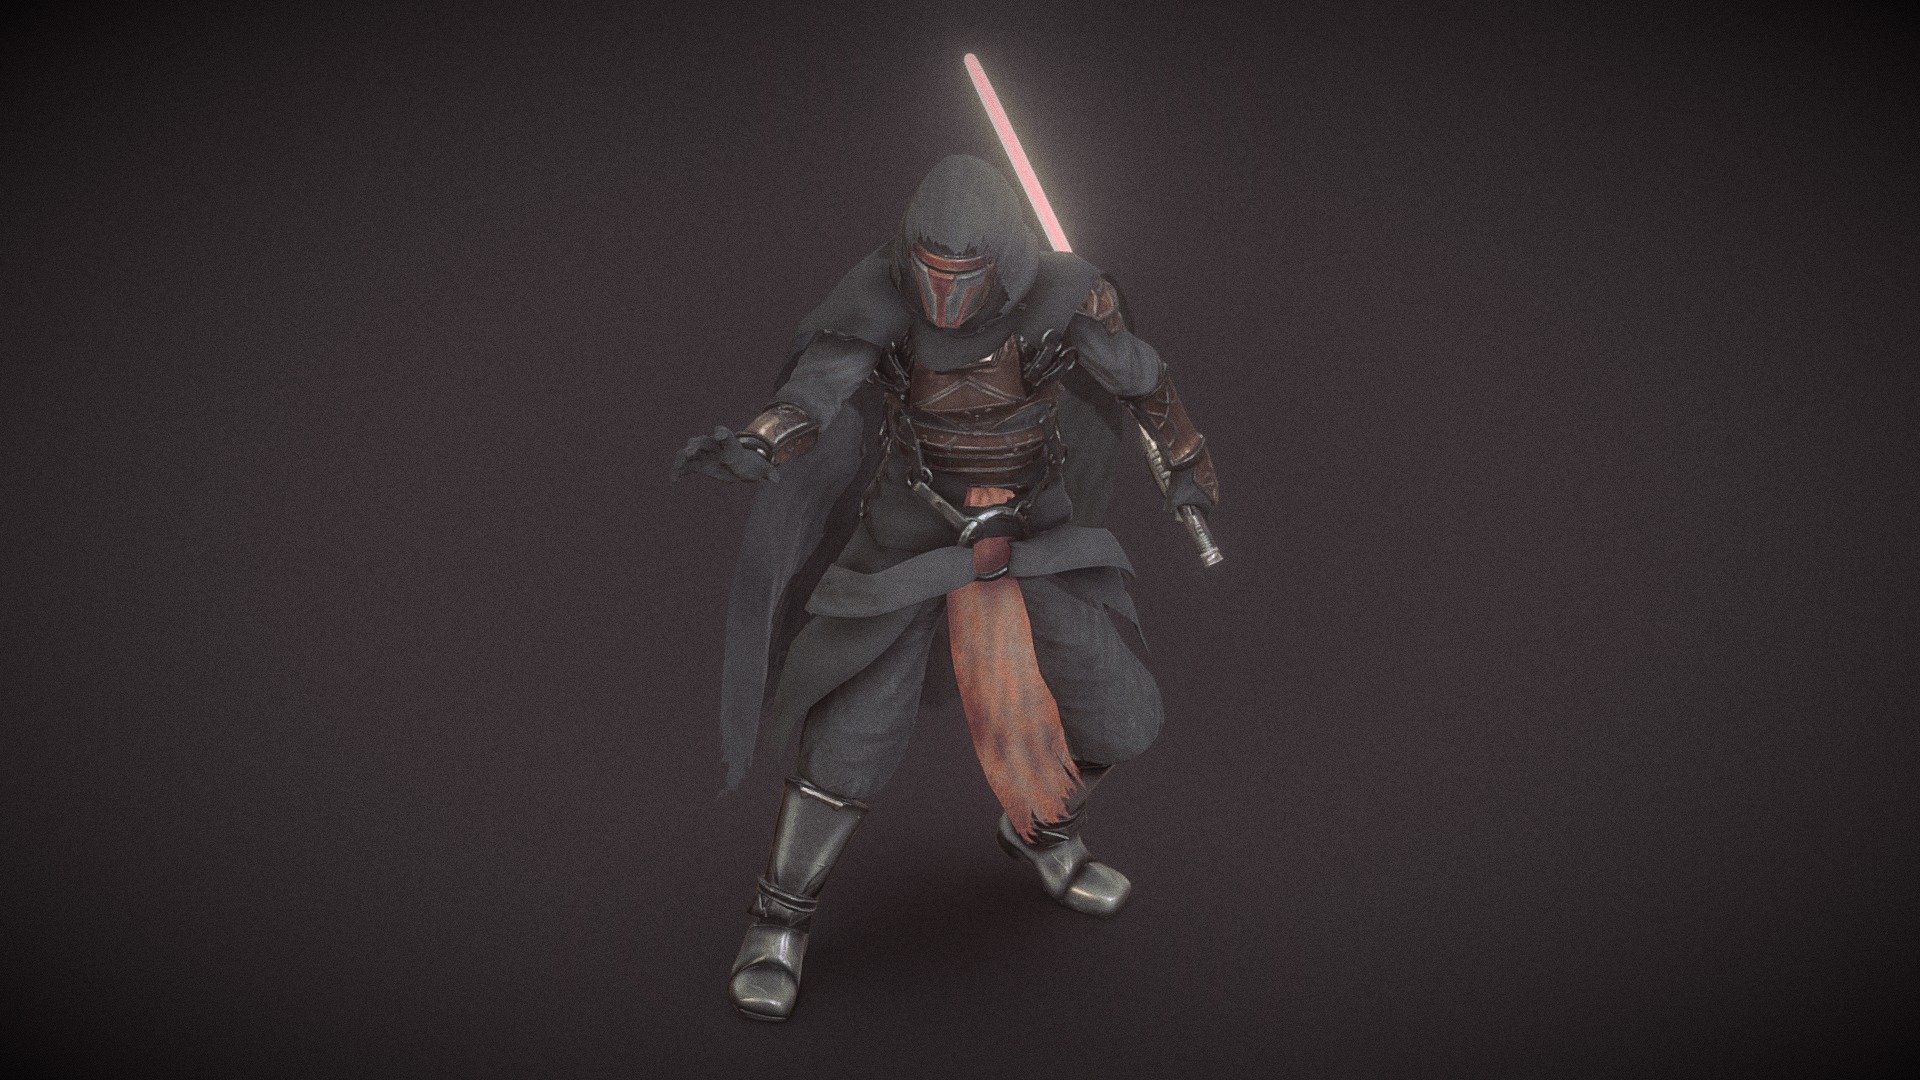 Origin:
Revan (/ˈrɛvən/) is a fictional character in the Star Wars franchise. He was created for BioWare's 2003 role-playing video game Star Wars: Knights of the Old Republic, in which he is the playable protagonist. 

Bio:
Revan was a Sith Lord and the namesake of the Sith Eternal army's 3rd Legion. Since the history - Darth Revan - 3D model by Roman R. Melkumov (@roman_m) 3d model